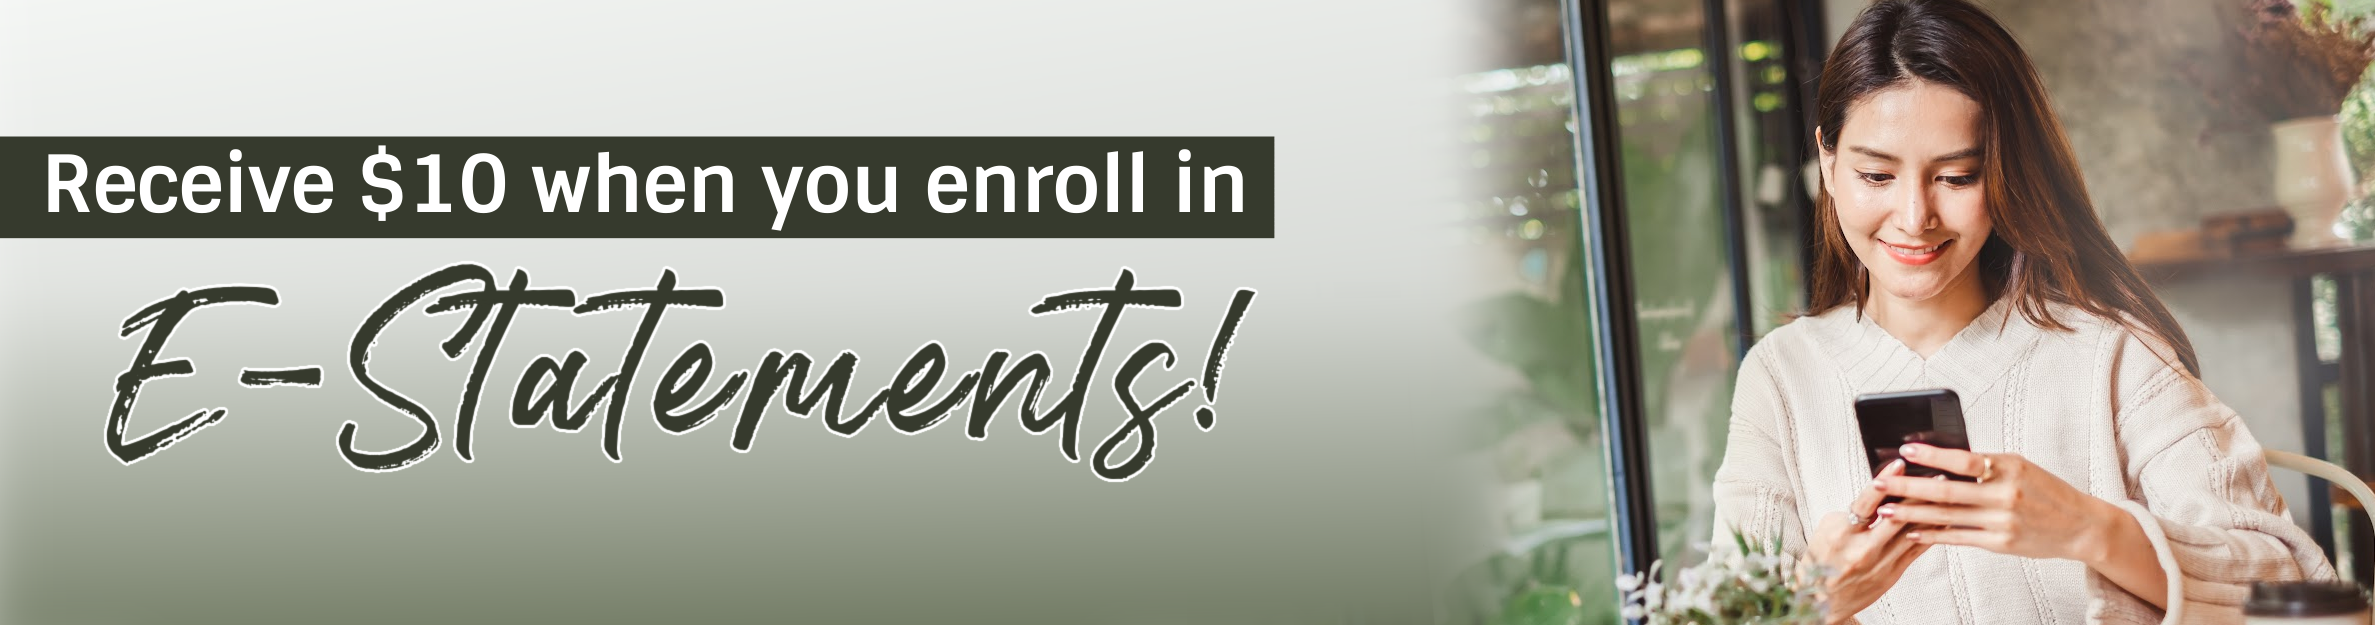 Receive $10 when you enroll in E-Statements!